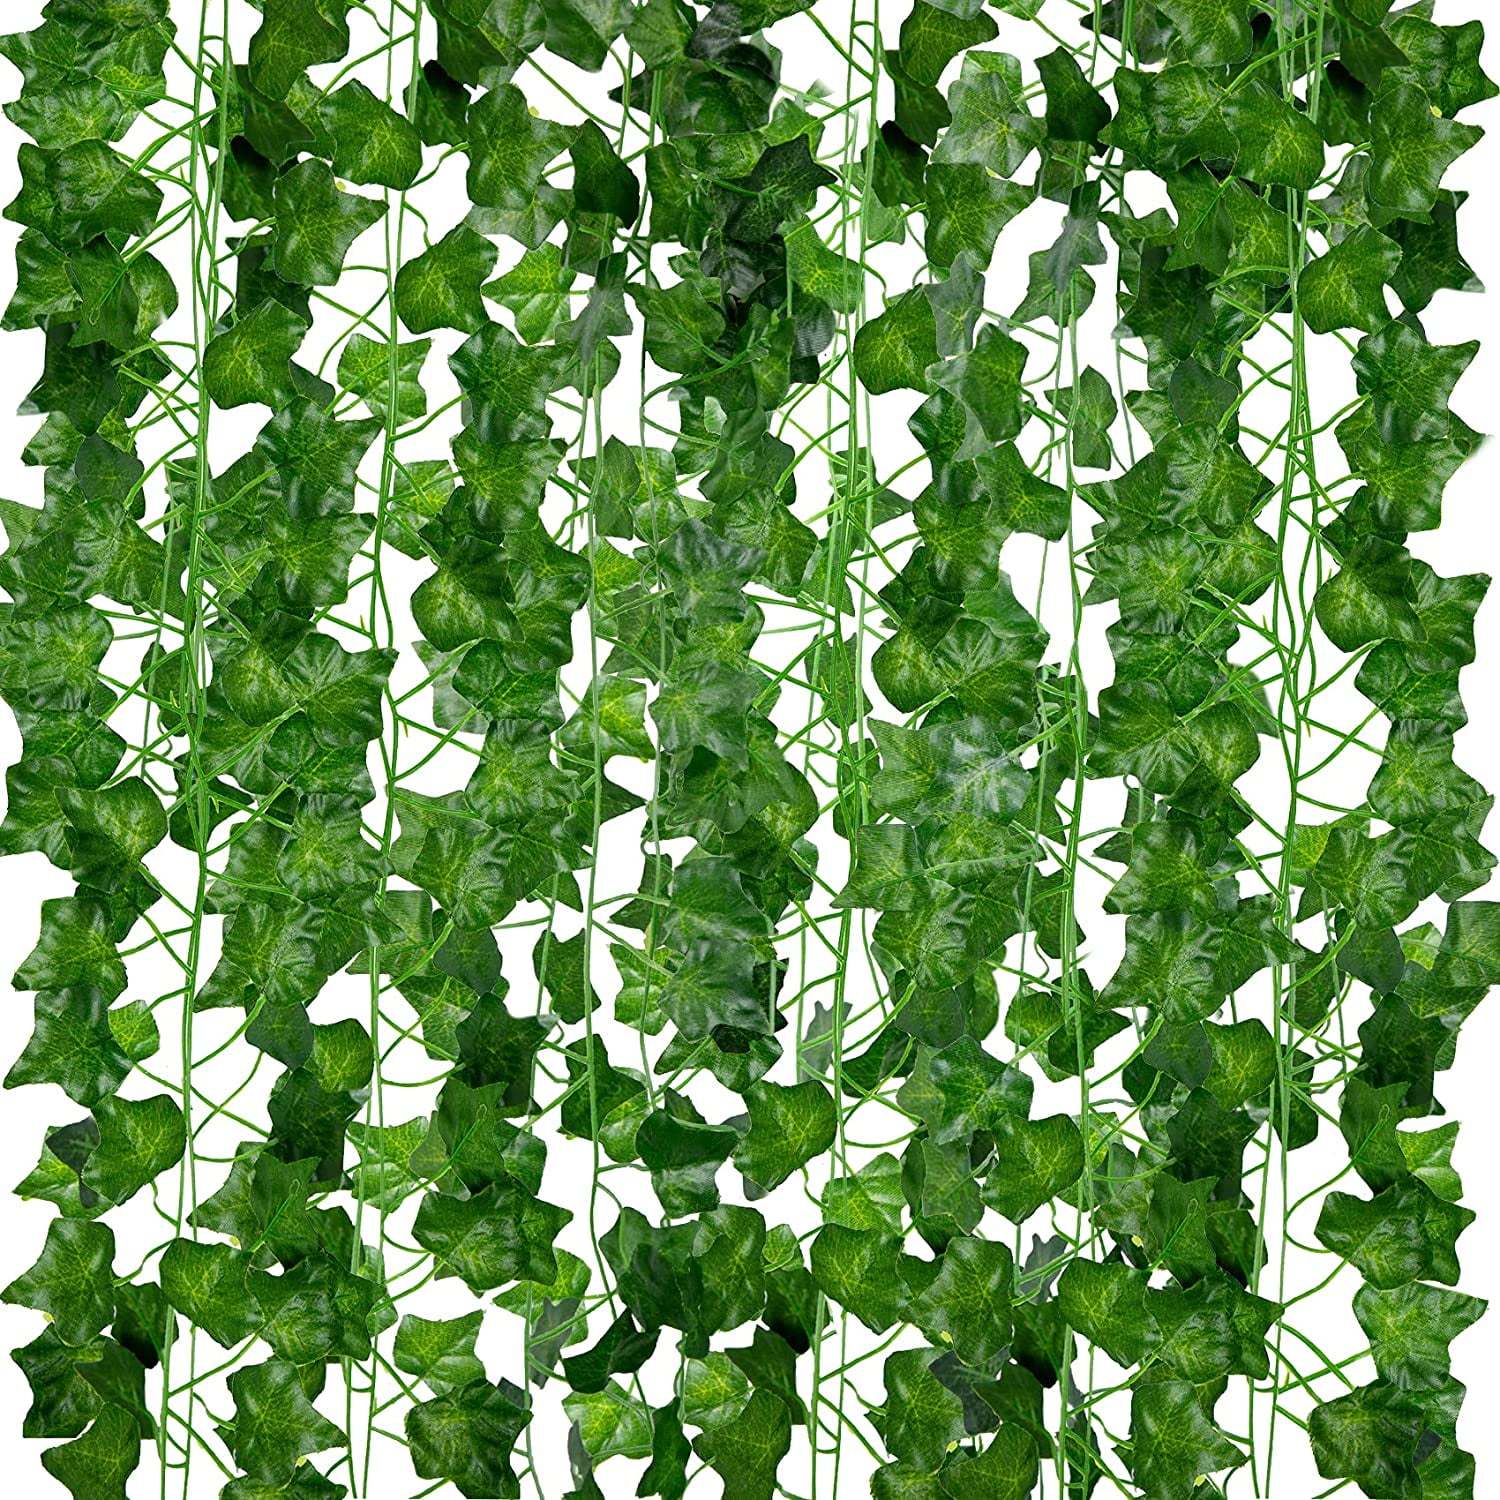 Huryfox 12 Pack Artificial Ivy Vines, Fake Ivy Garland for Home Decor, Faux  Hanging Plants for Indoor Outdoor Aesthetics Decoration